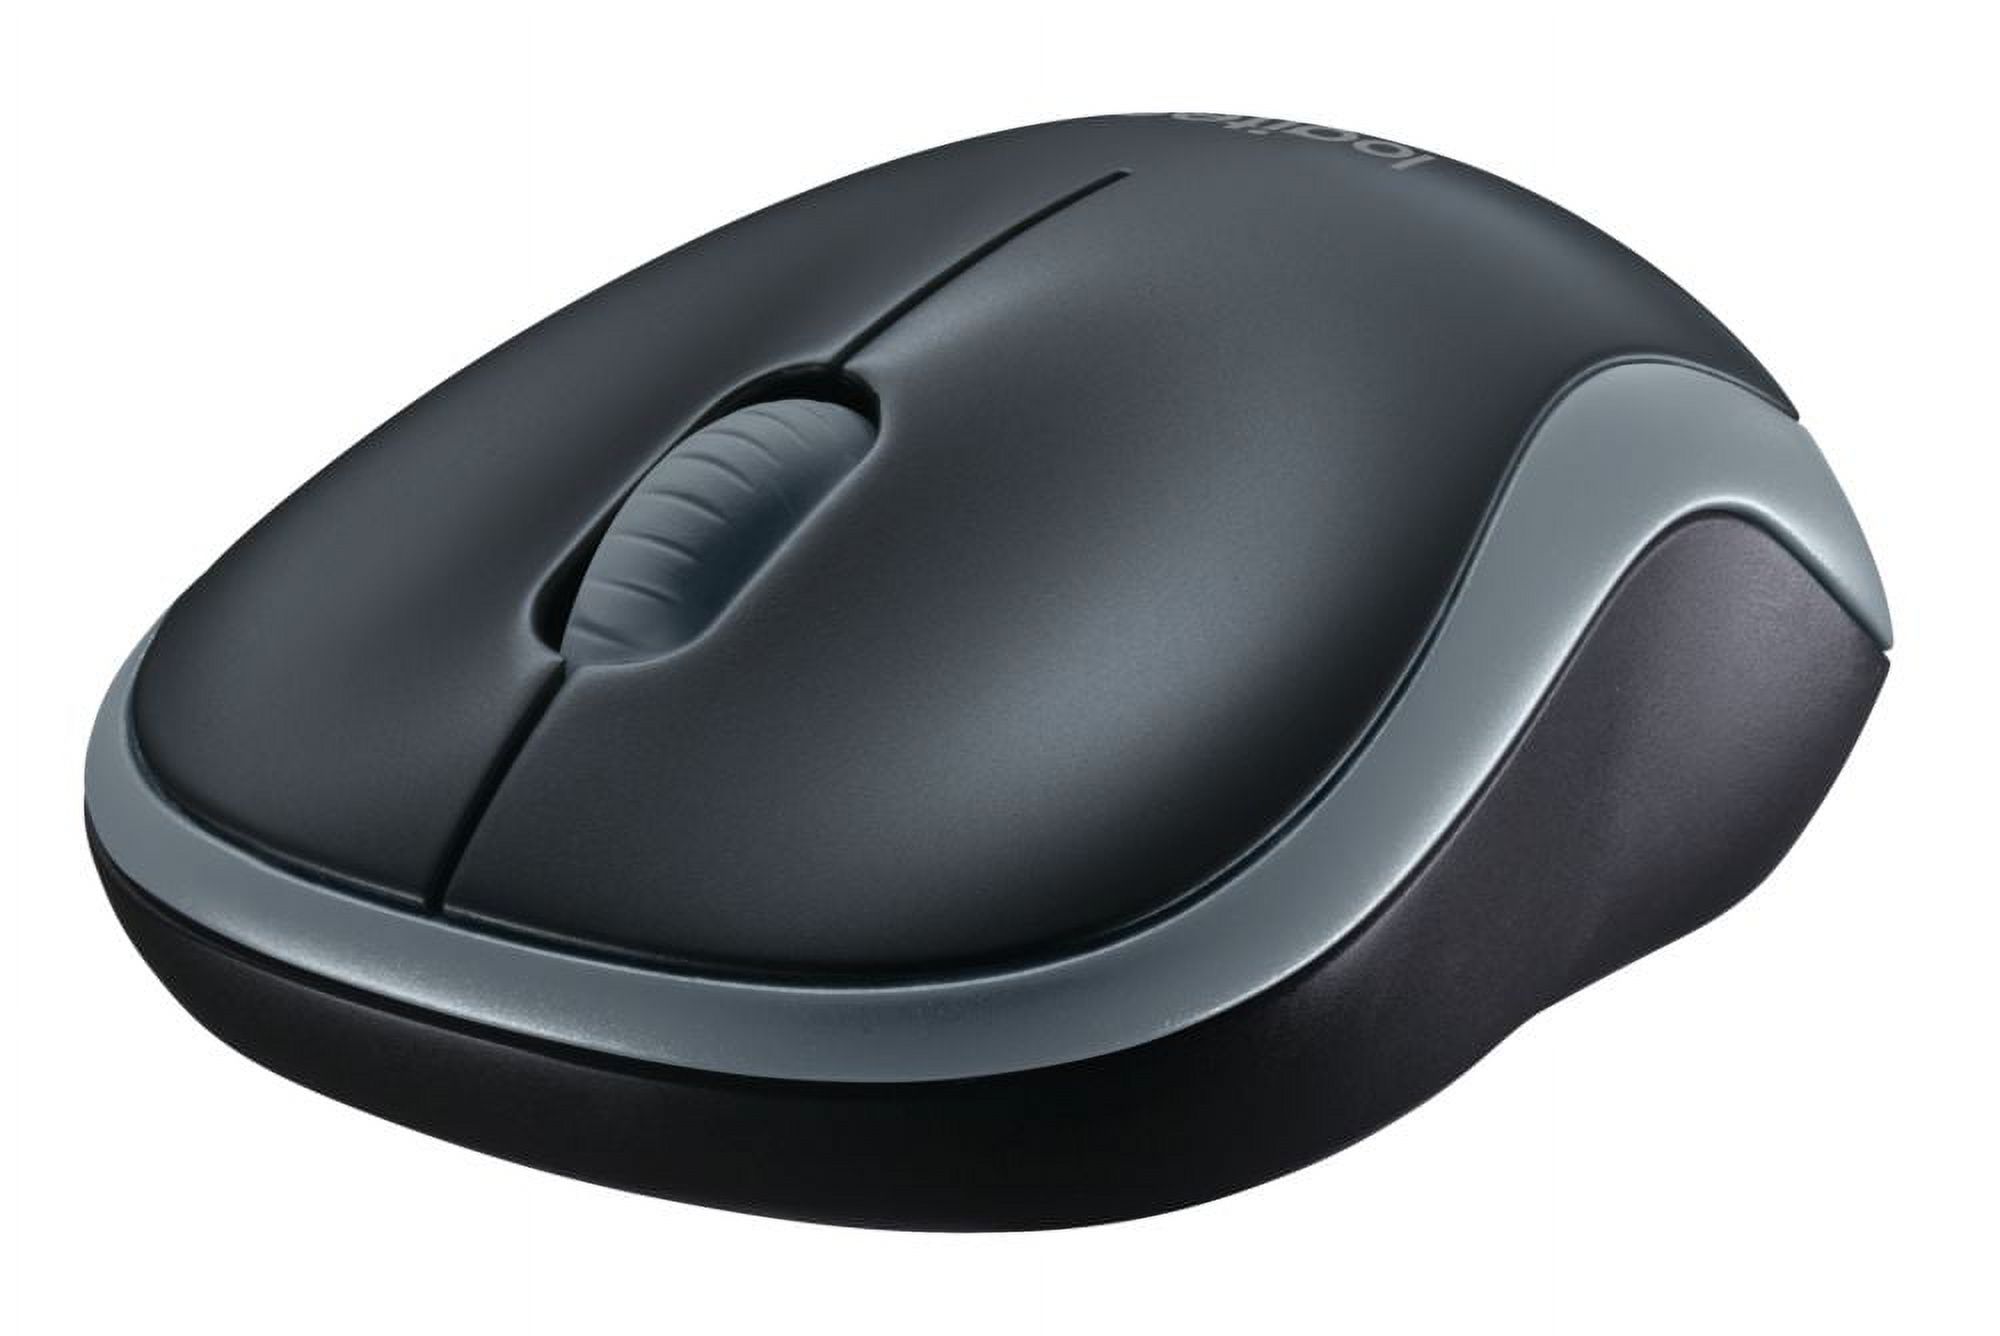 Logitech M185 Wireless Computer Mouse - image 4 of 4